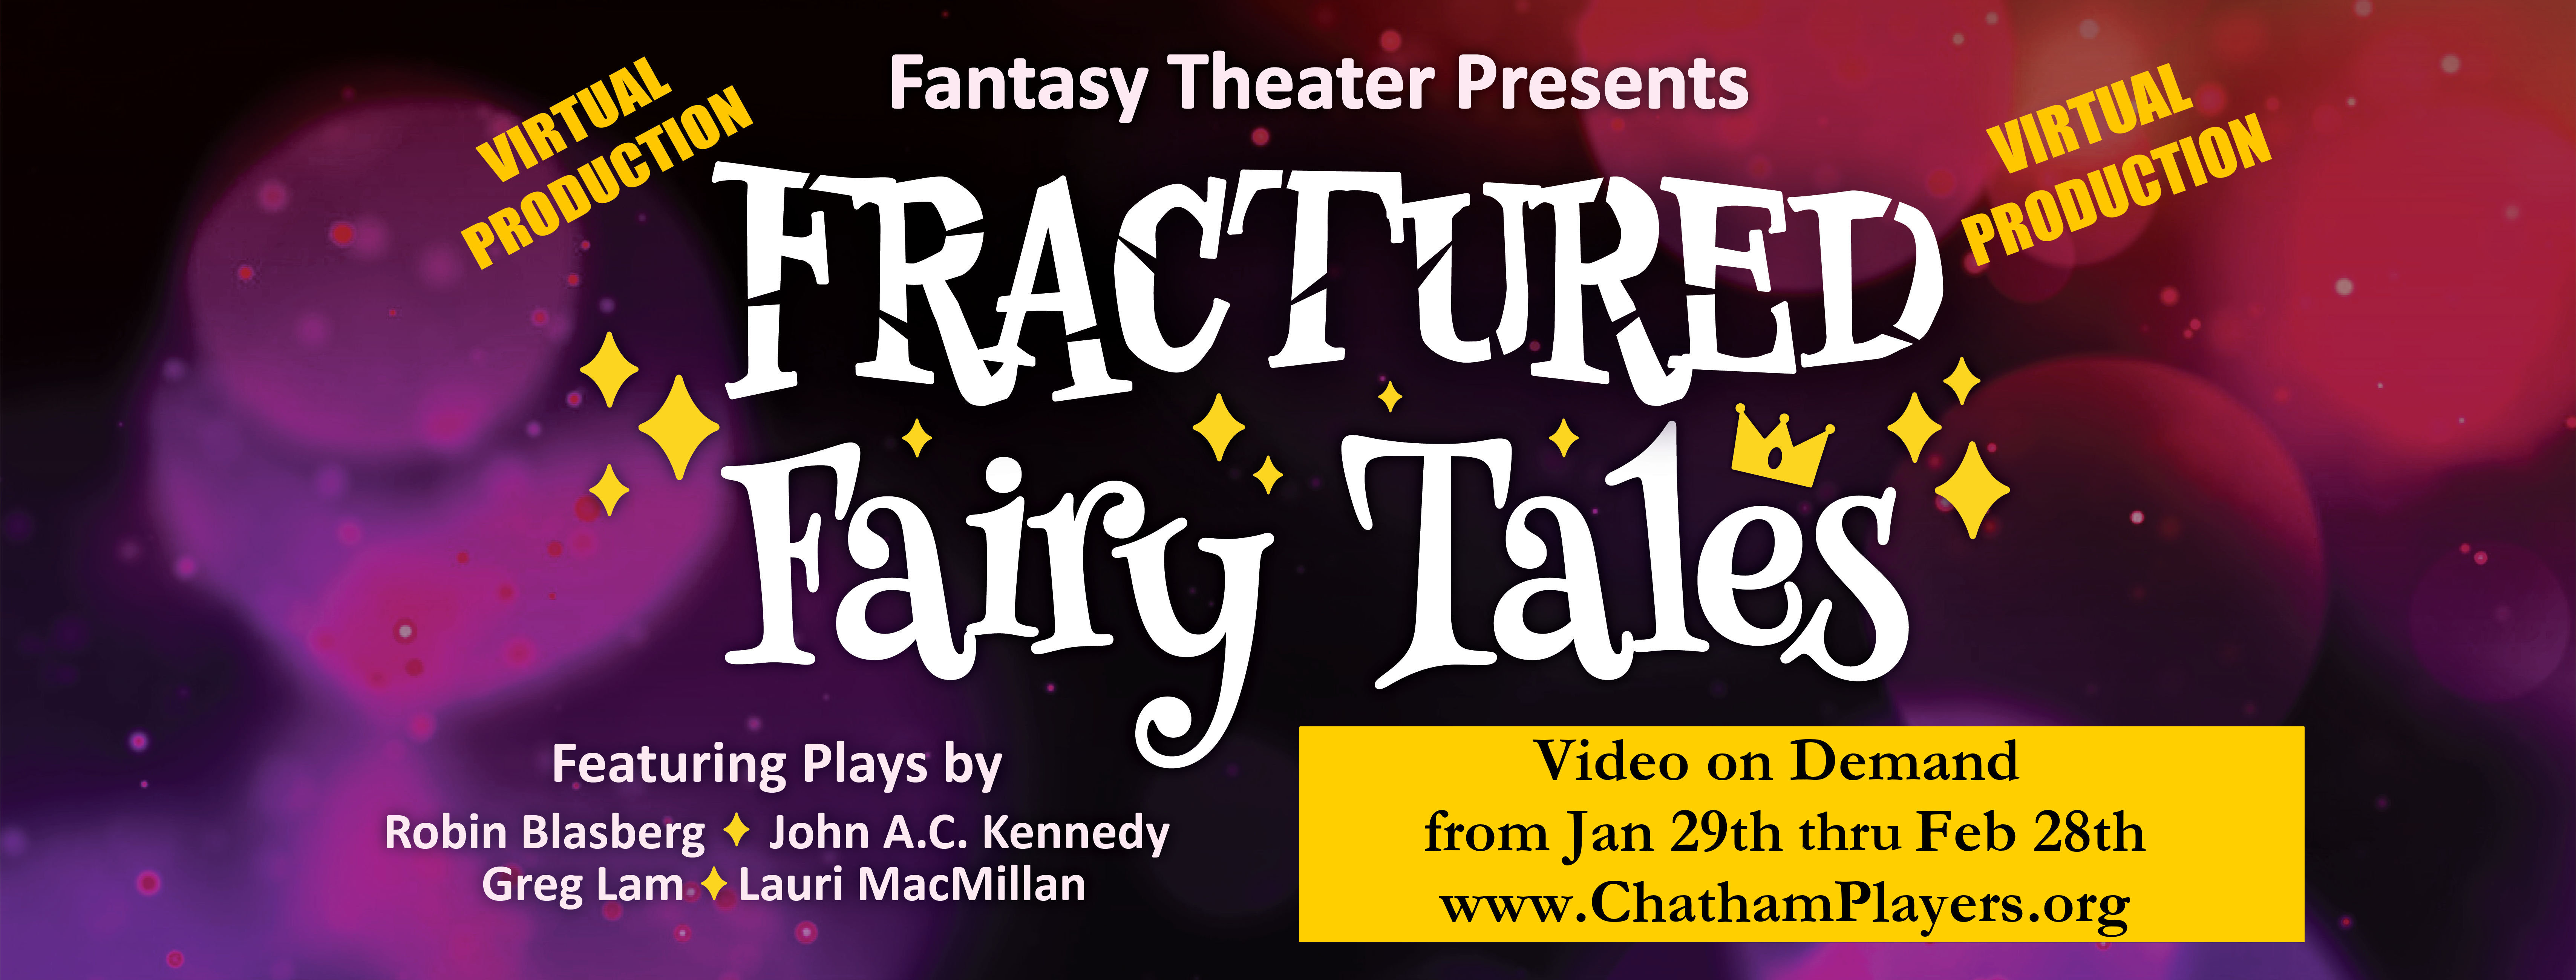 Fantasy Theater, Fractured Fairy Tales, Children's Theater